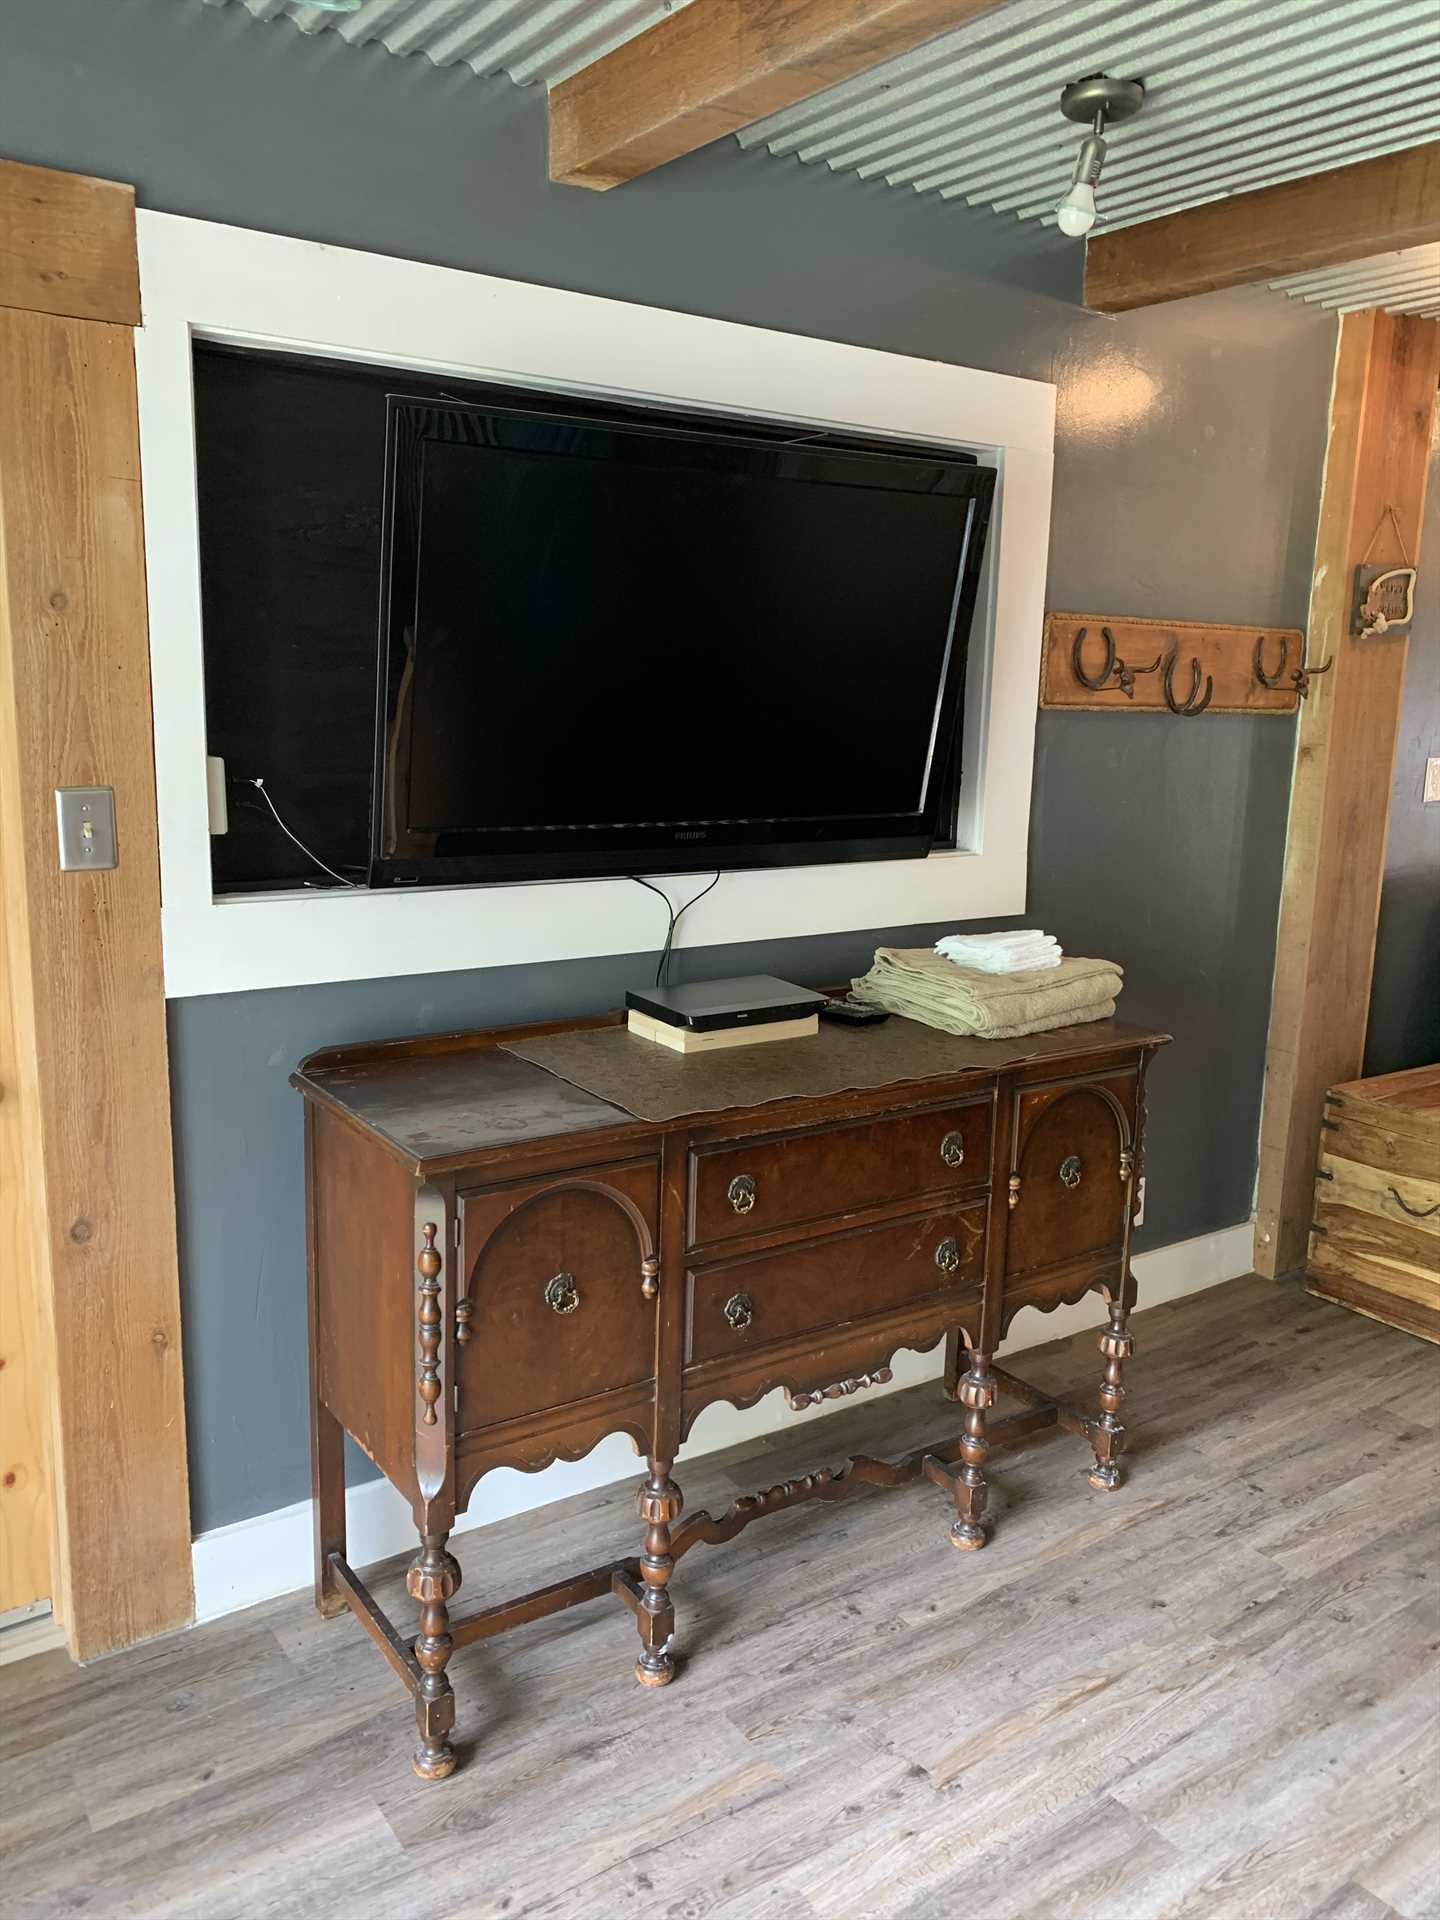                                                 Your stay at the Hideaway includes TV with Roku and cable channels and Wifi Internet service.